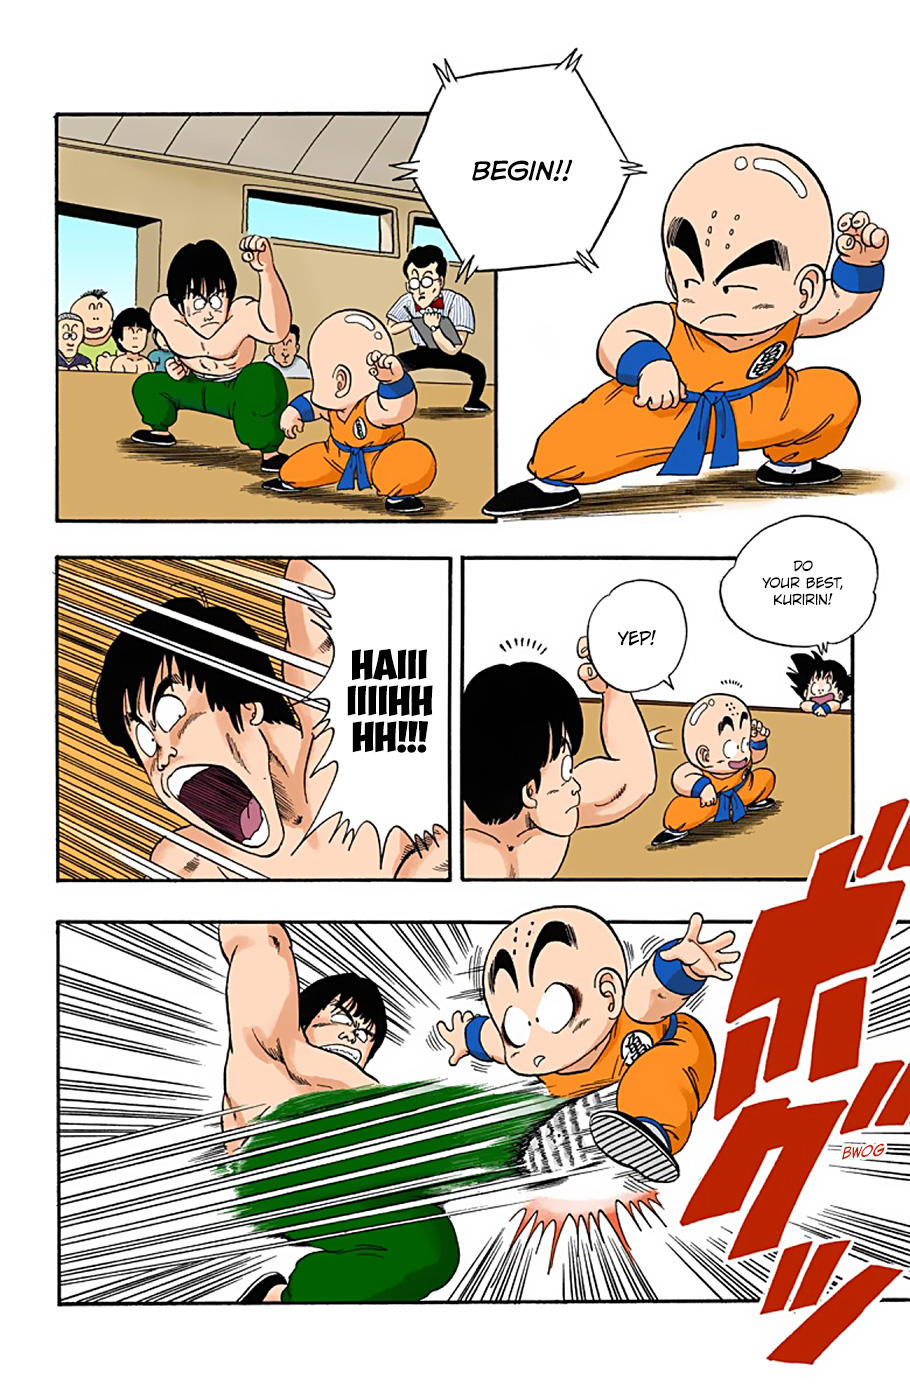 Dragon Ball - Full Color Edition Vol.3 Chapter 34: Unrivaled Under The Heavens!! page 4 - Mangakakalot